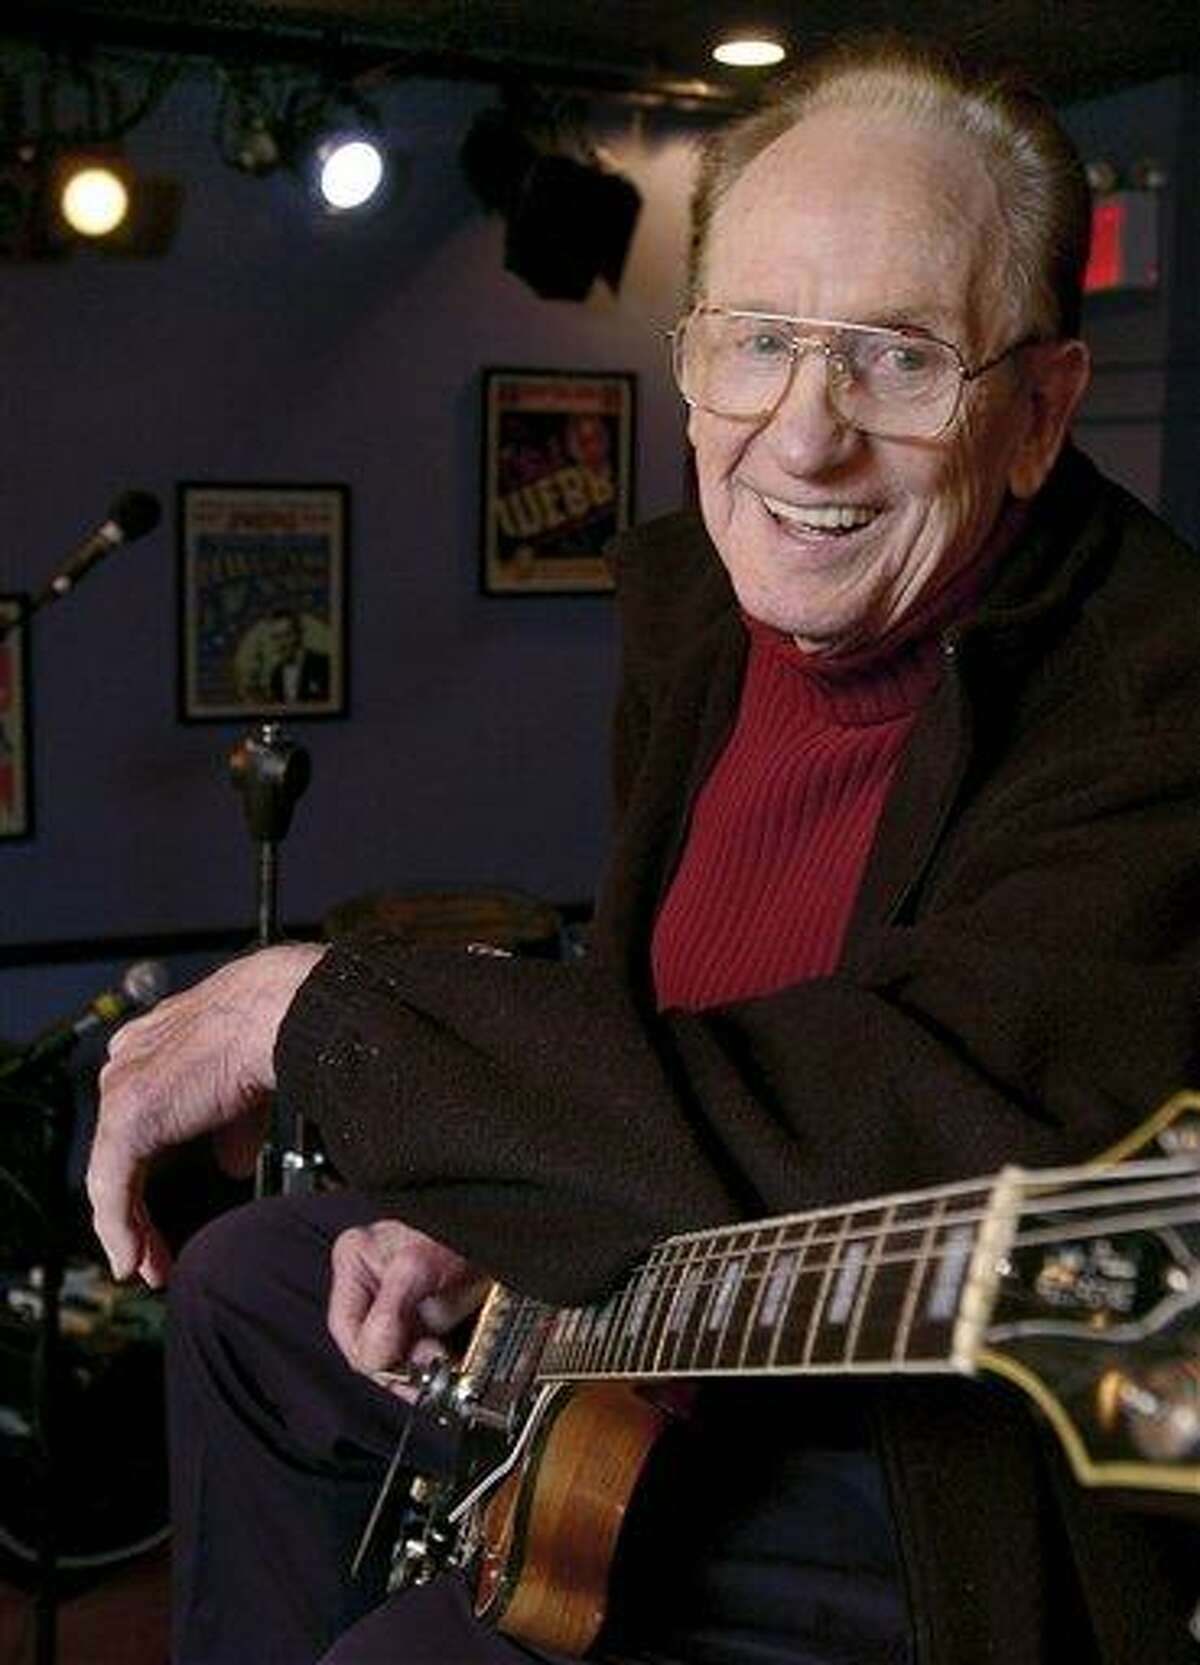 FILE - In this Oct. 4, 2004 file photo, guitar legend Les Paul gets ready to rehearse at the Iridium Jazz Club in New York. Paul, 94, the guitarist and inventor who changed the course of music with the electric guitar and multitrack recording and had a string of hits, died, Thursday, Aug. 13, 2009 in White Plains, N.Y., according to Gibson Guitar. (AP Photo/Richard Drew, file)